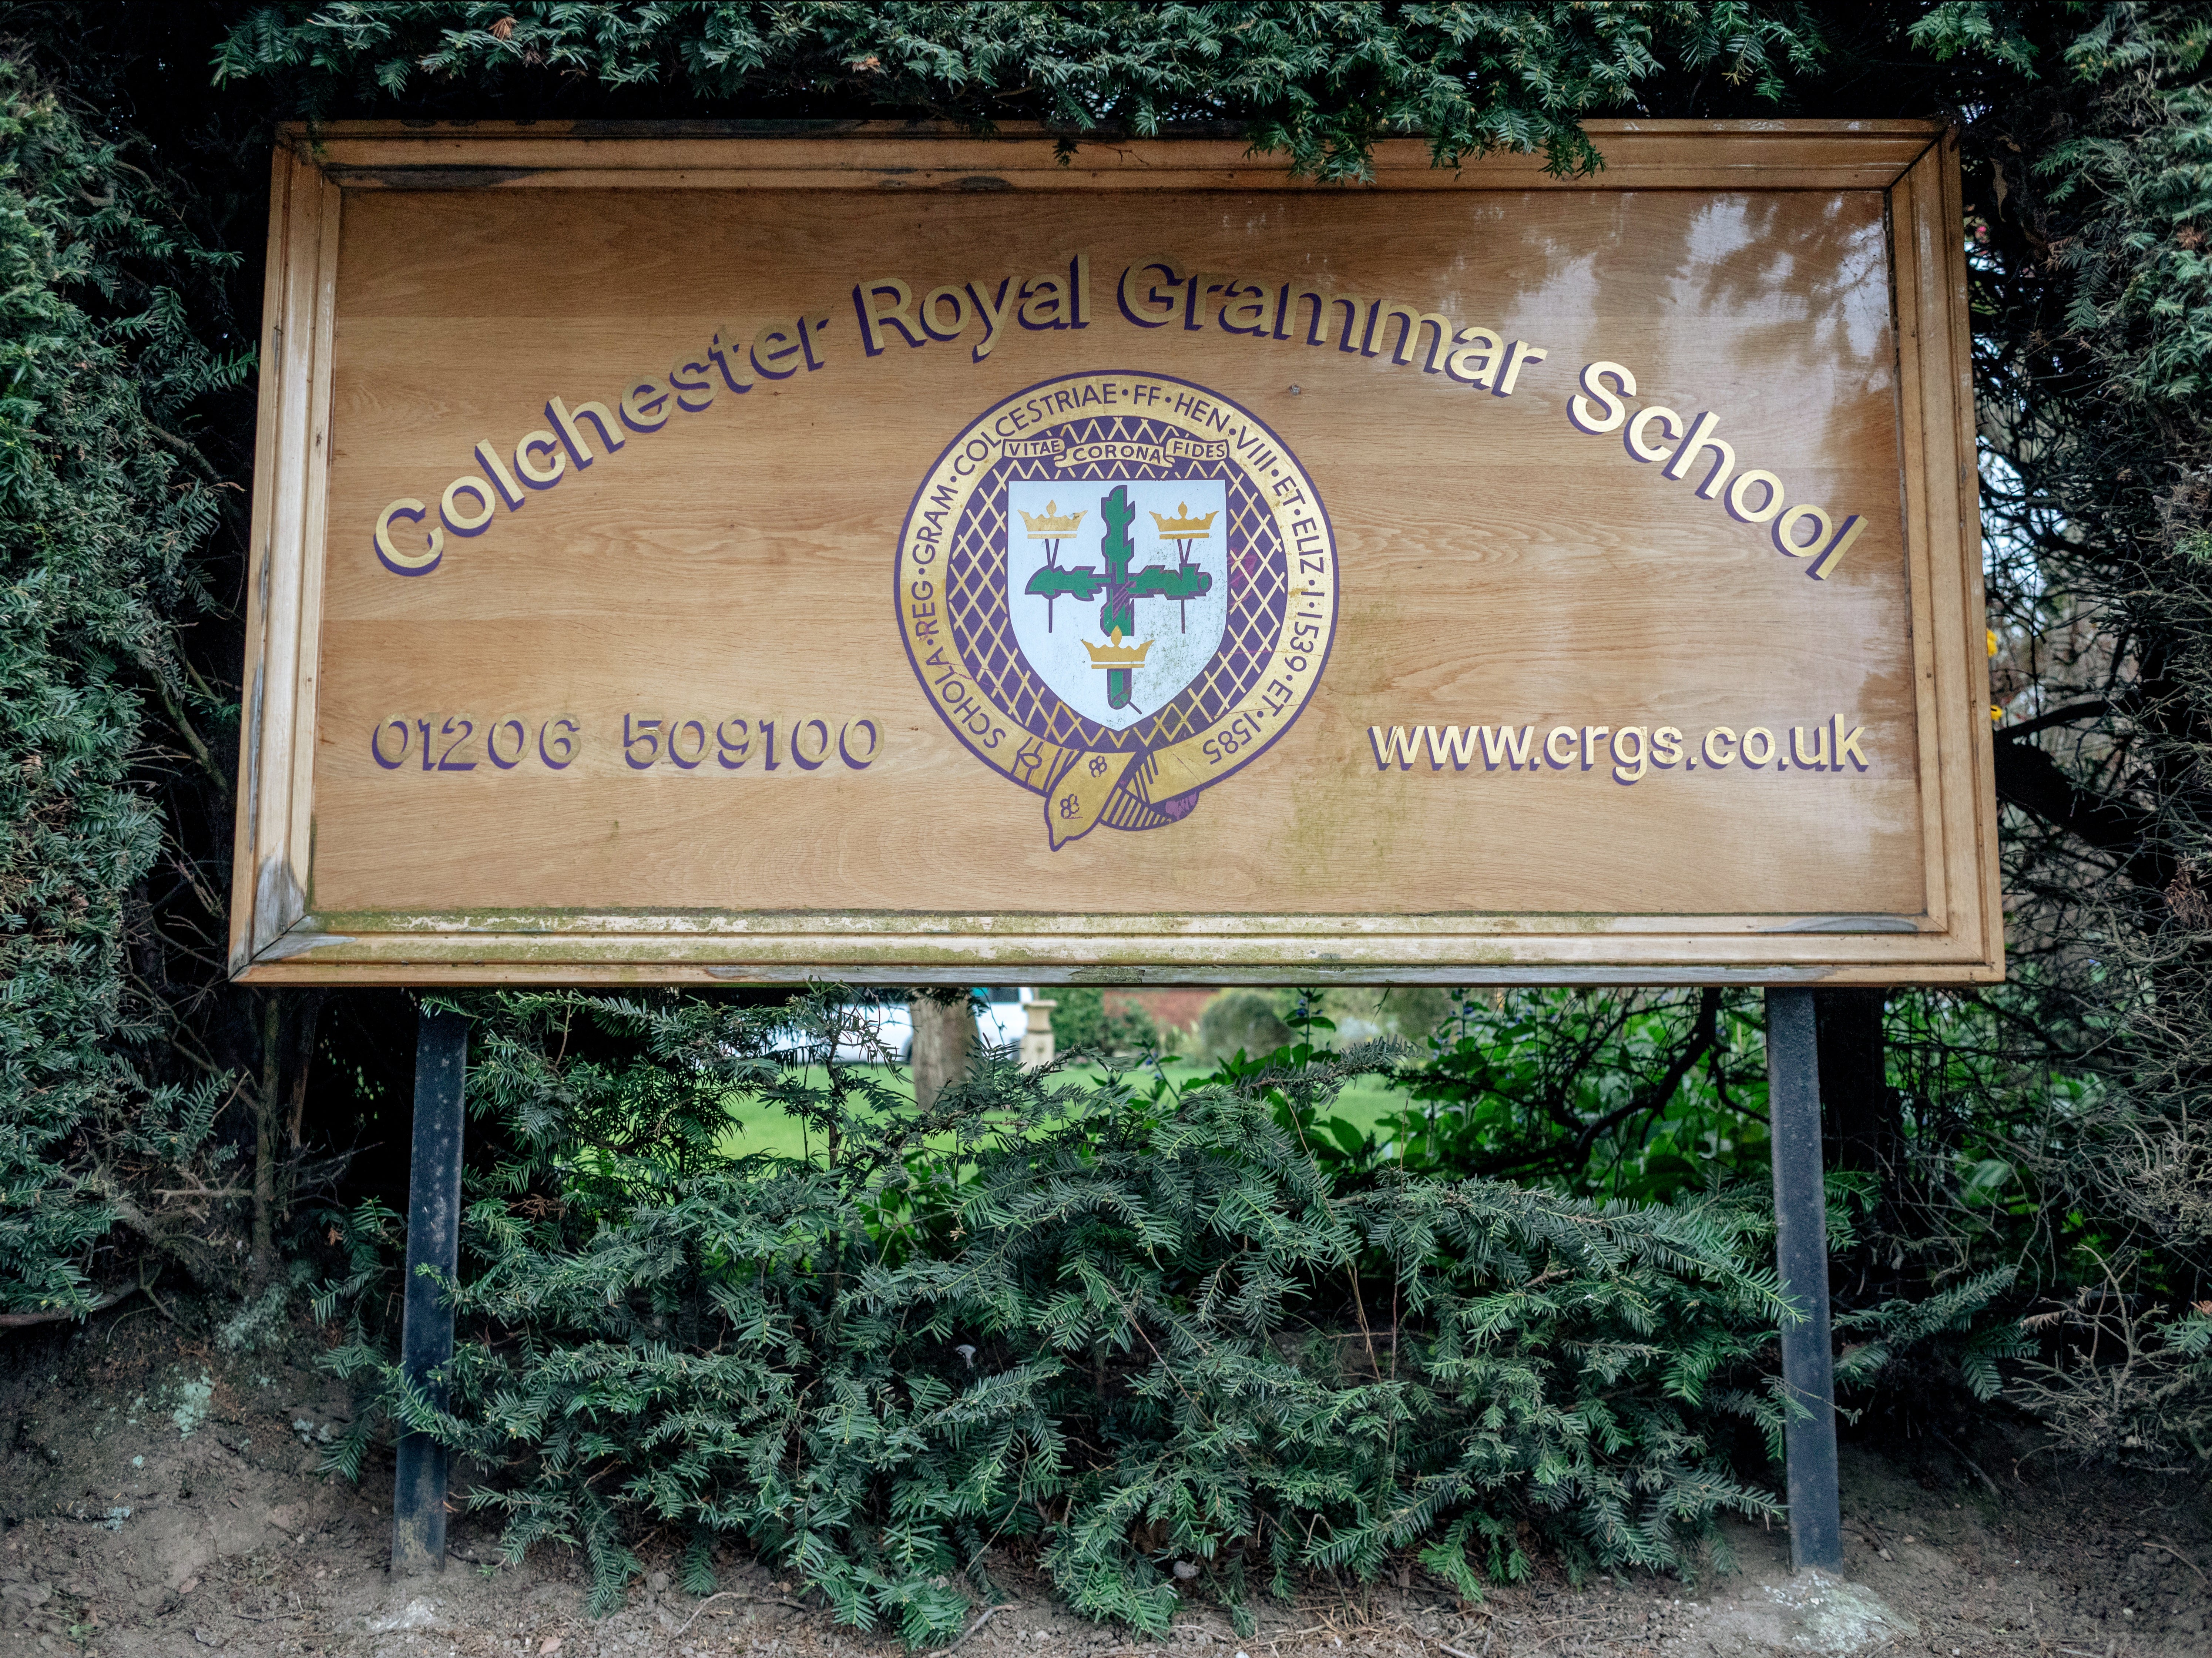 A teacher at Colchester Royal Grammar School has been accused of using a mug carrying an offensive image